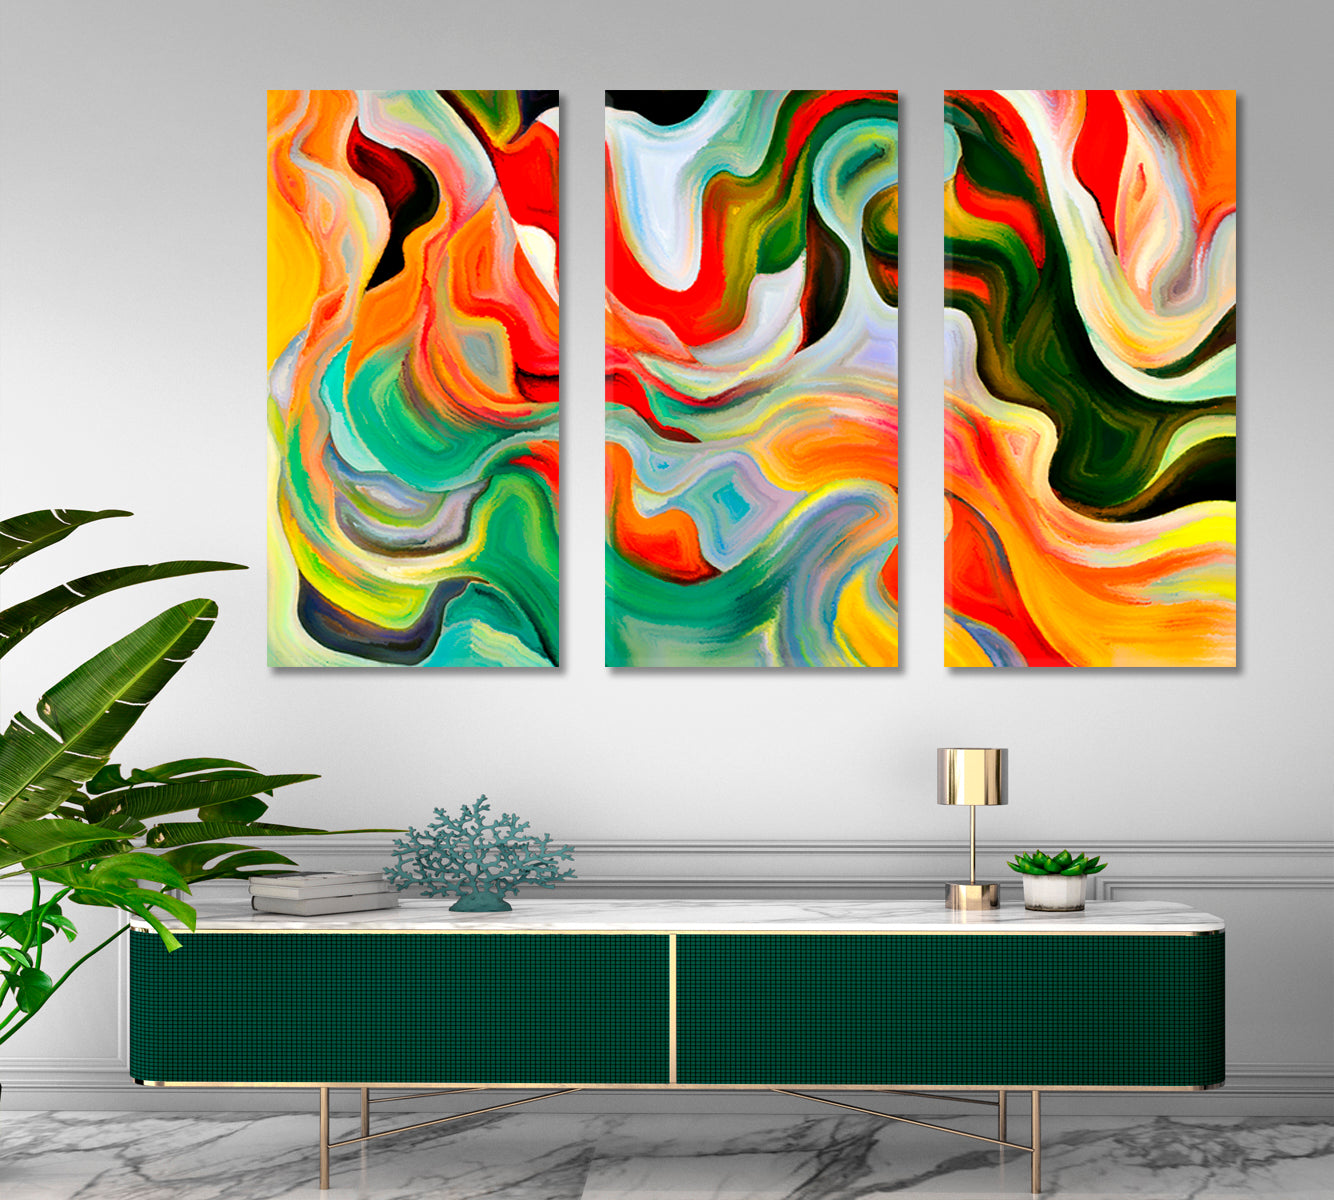 Shapes Within Beautiful Colorful Abstraction Abstract Art Print Artesty 3 panels 36" x 24" 